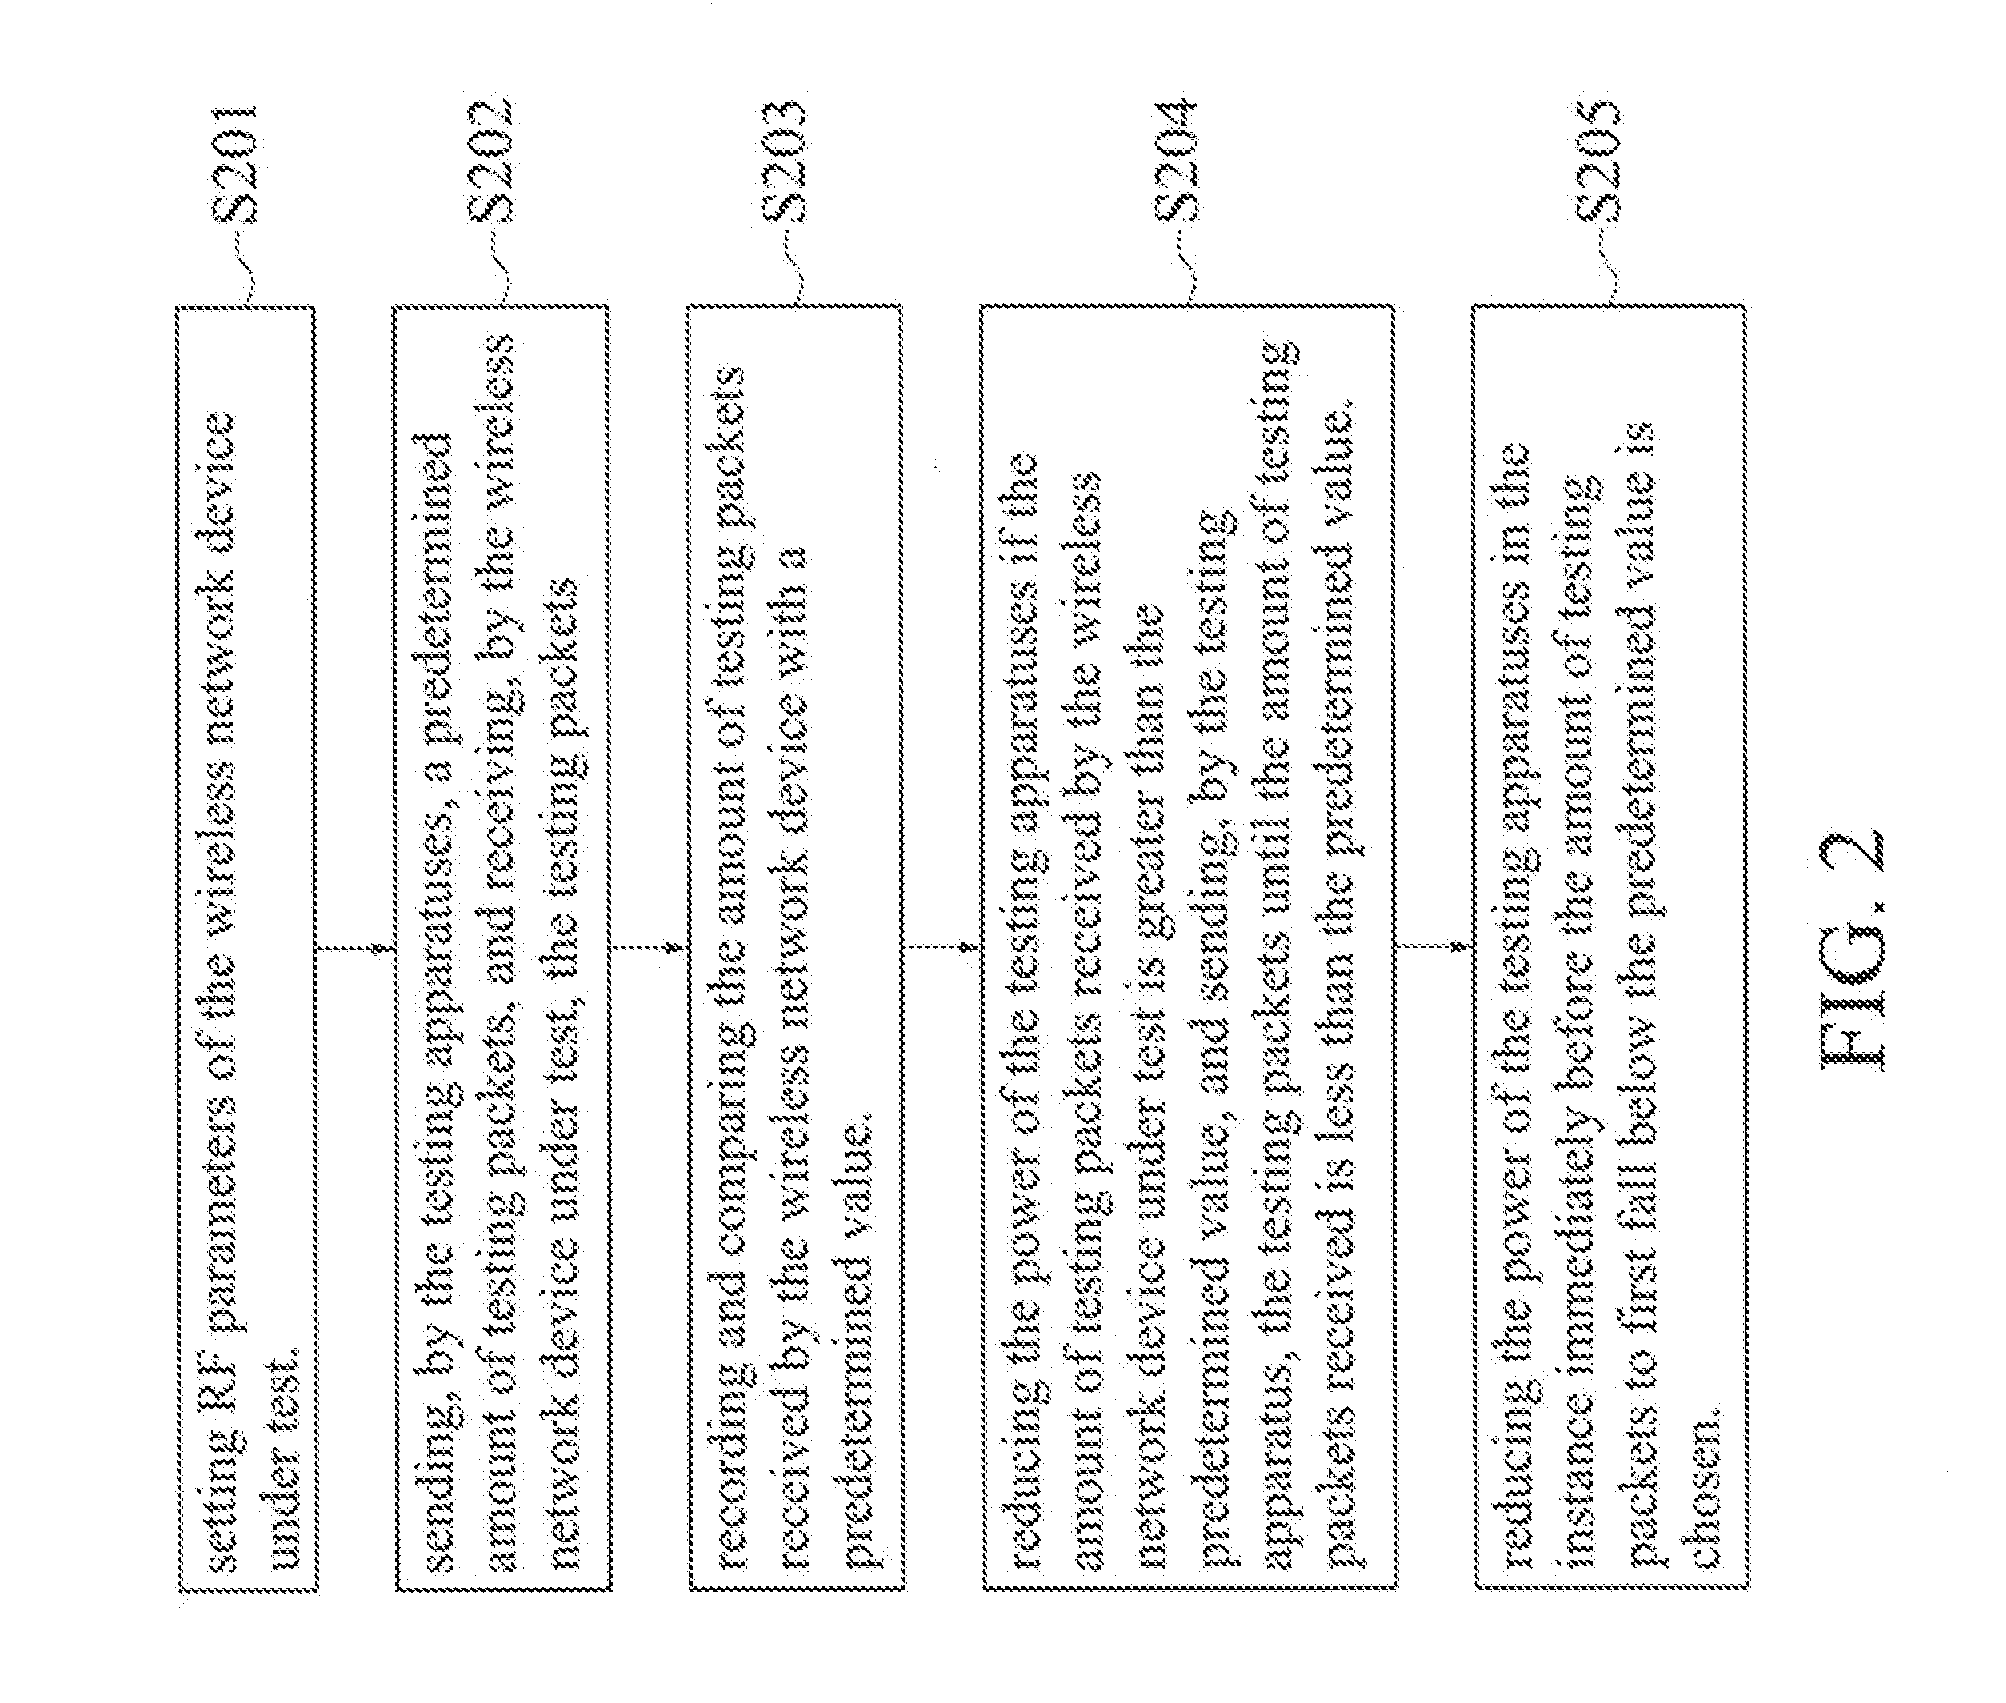 System and method for testing wireless network device